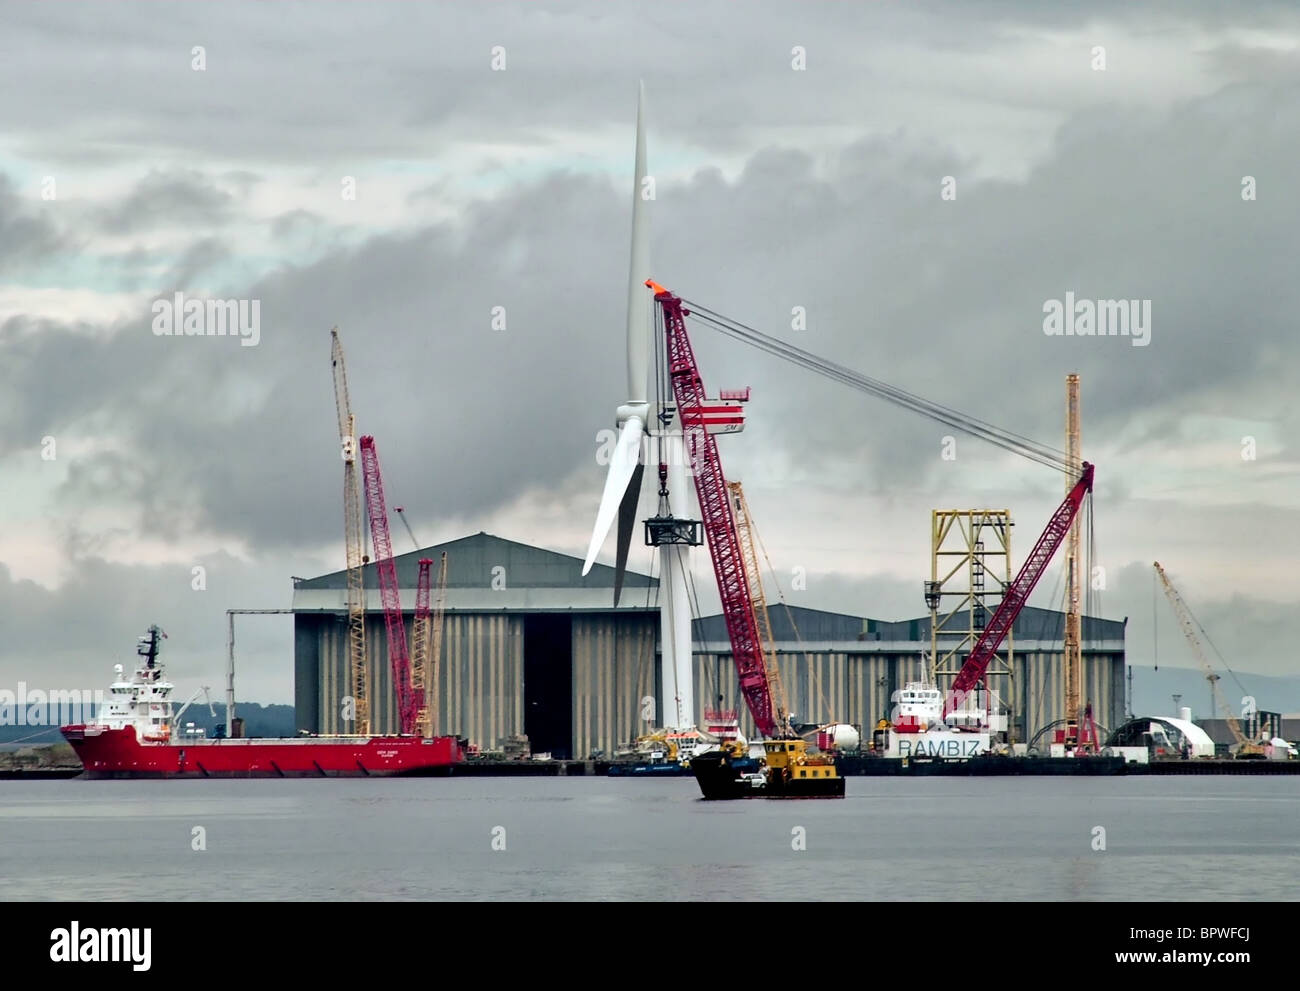 The Rambiz crane barge readies a giant off-shore wind turbine for installation in the Moray Firth at the Nigg Yard, Cromarty Stock Photo